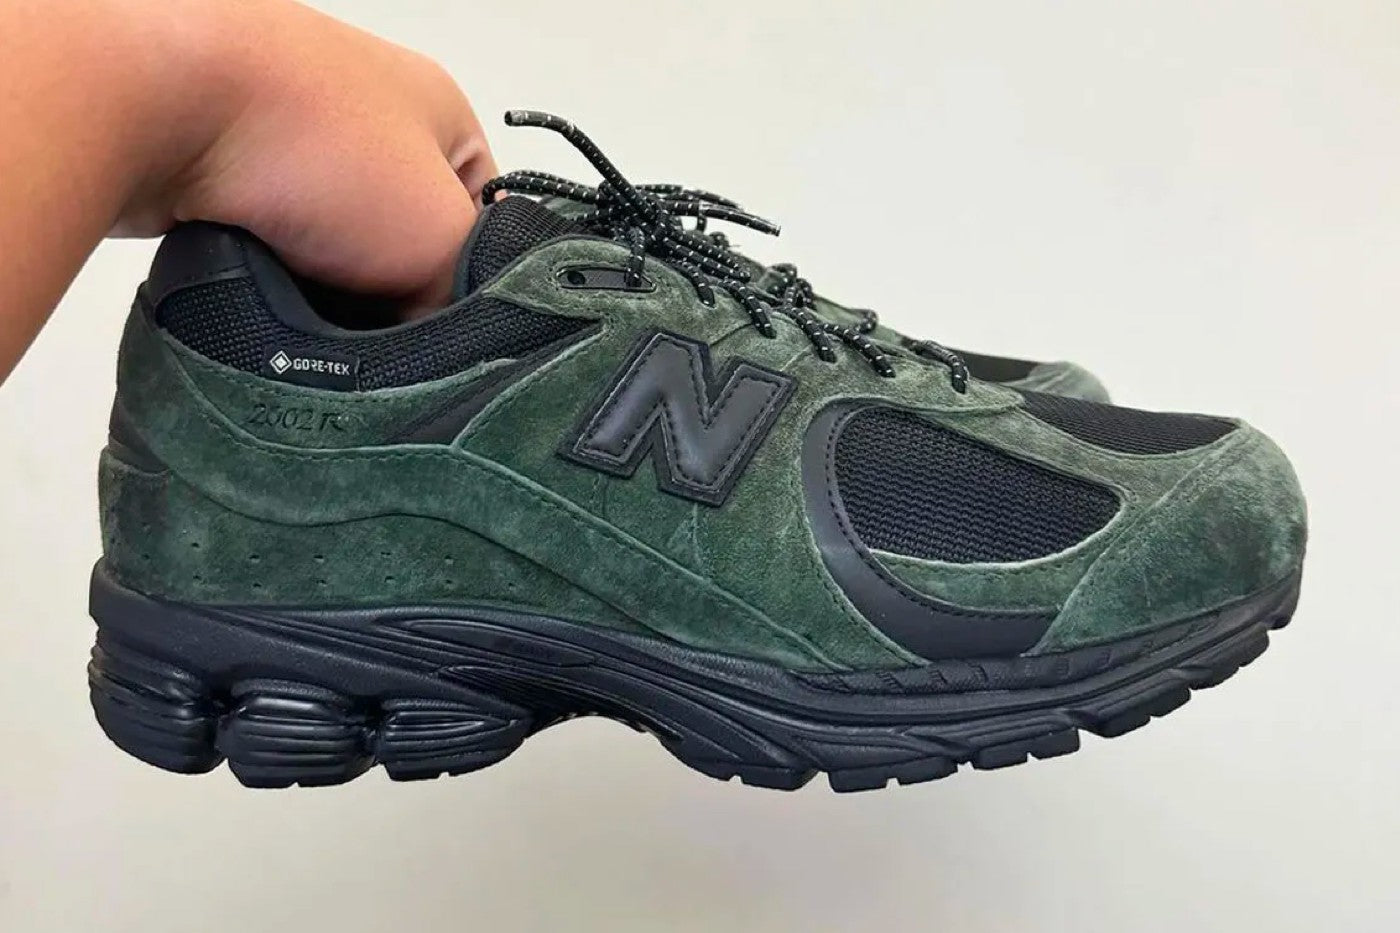 The JJJJound x New Balance 2002R “Green” Gets Covered in